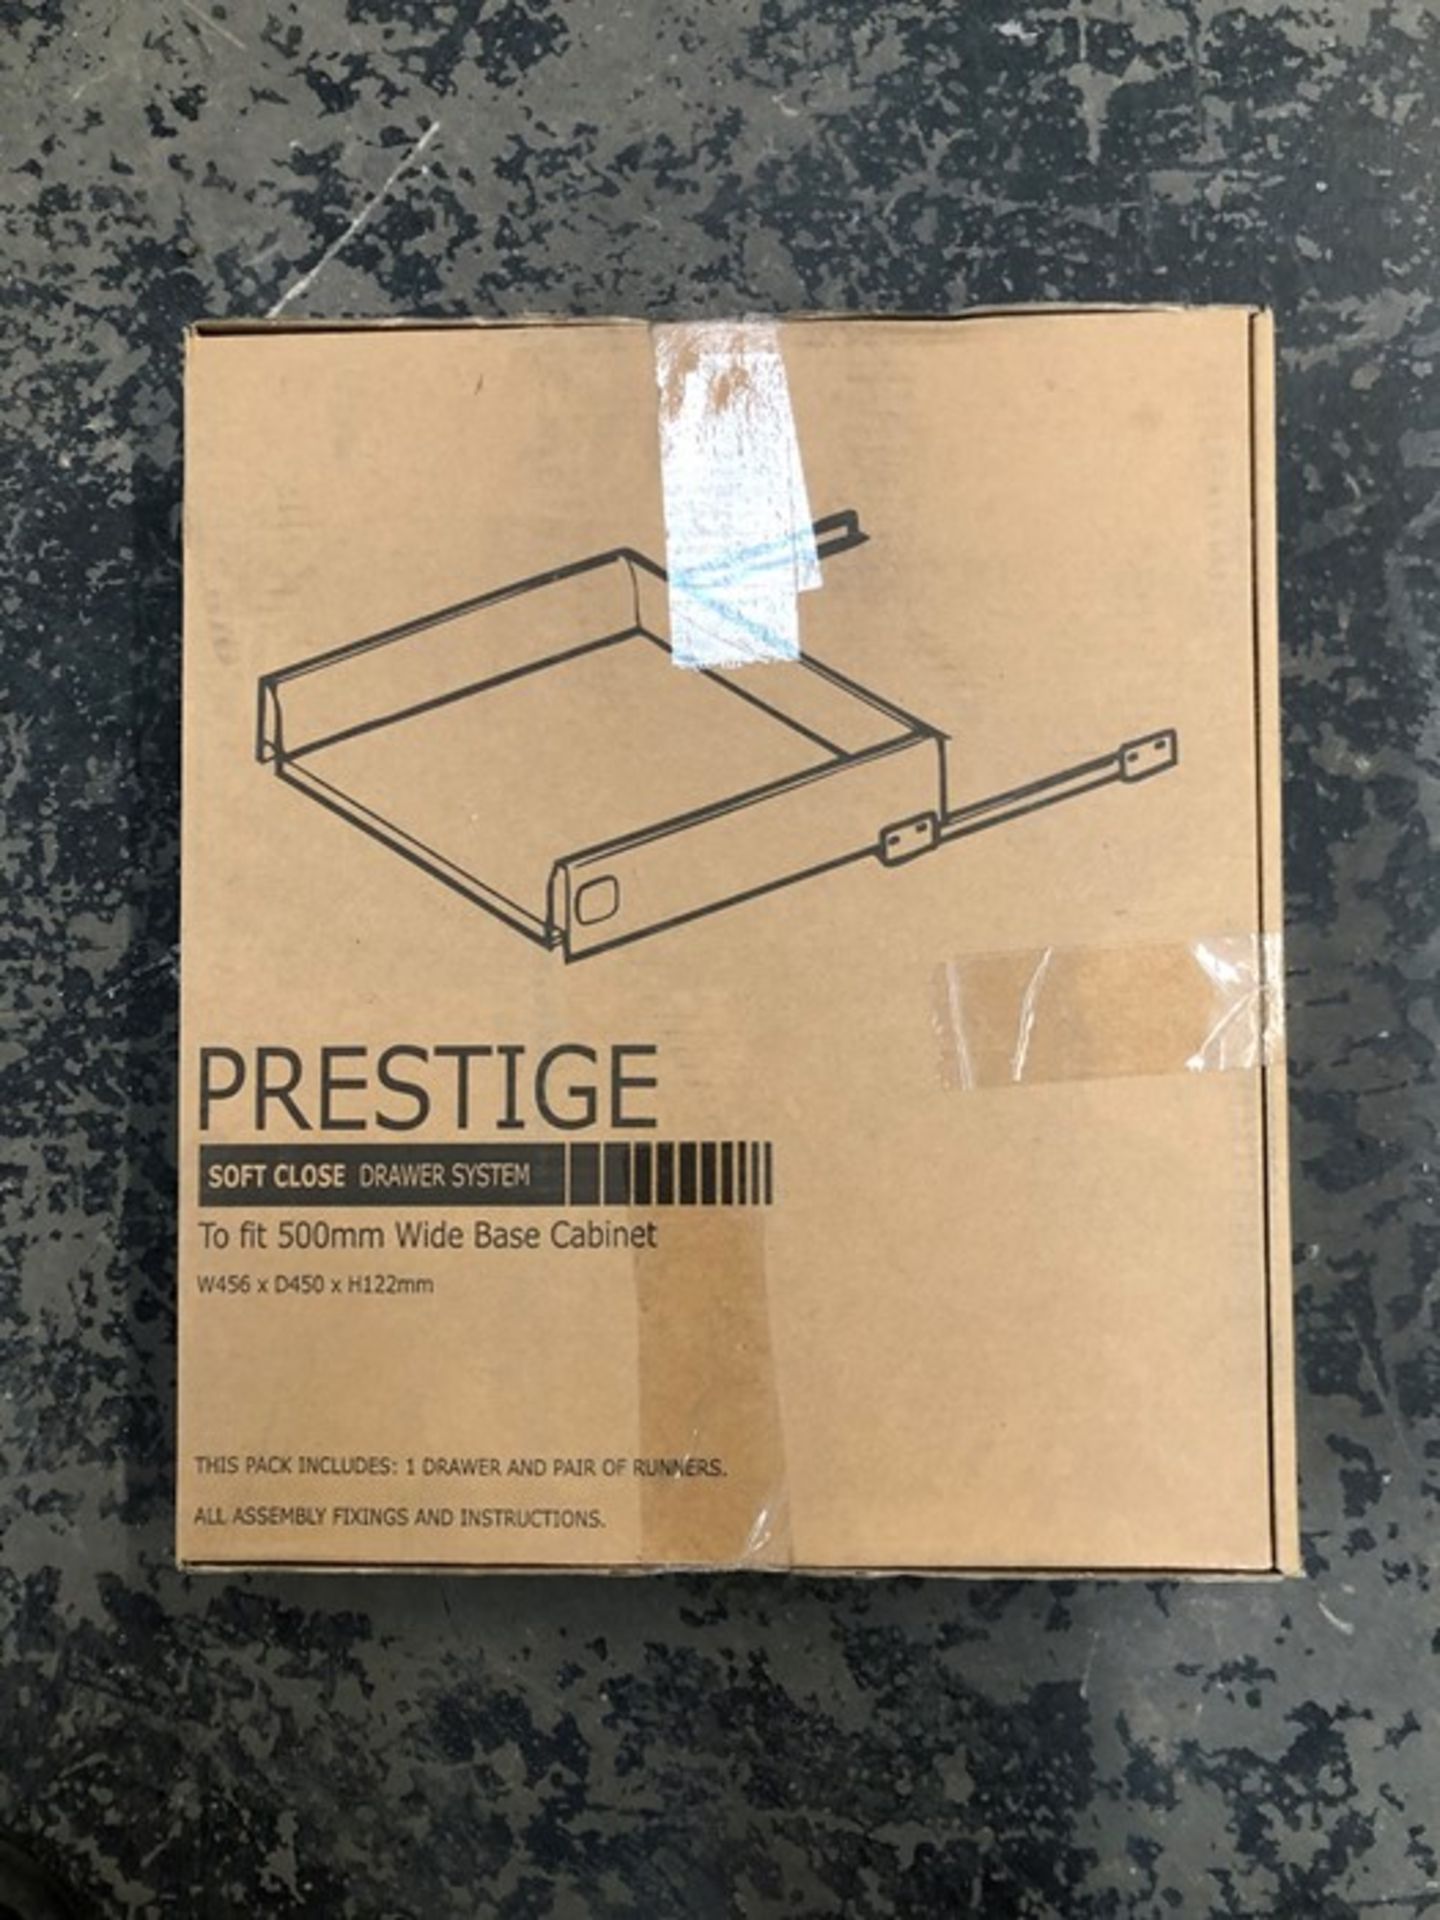 1 BOXED PRESTIGE SOFT CLOSE DRAWER SYSTEM TO FIT 500MM WIDE BASE CABINET / SIZE W456 X D450 X H122MM